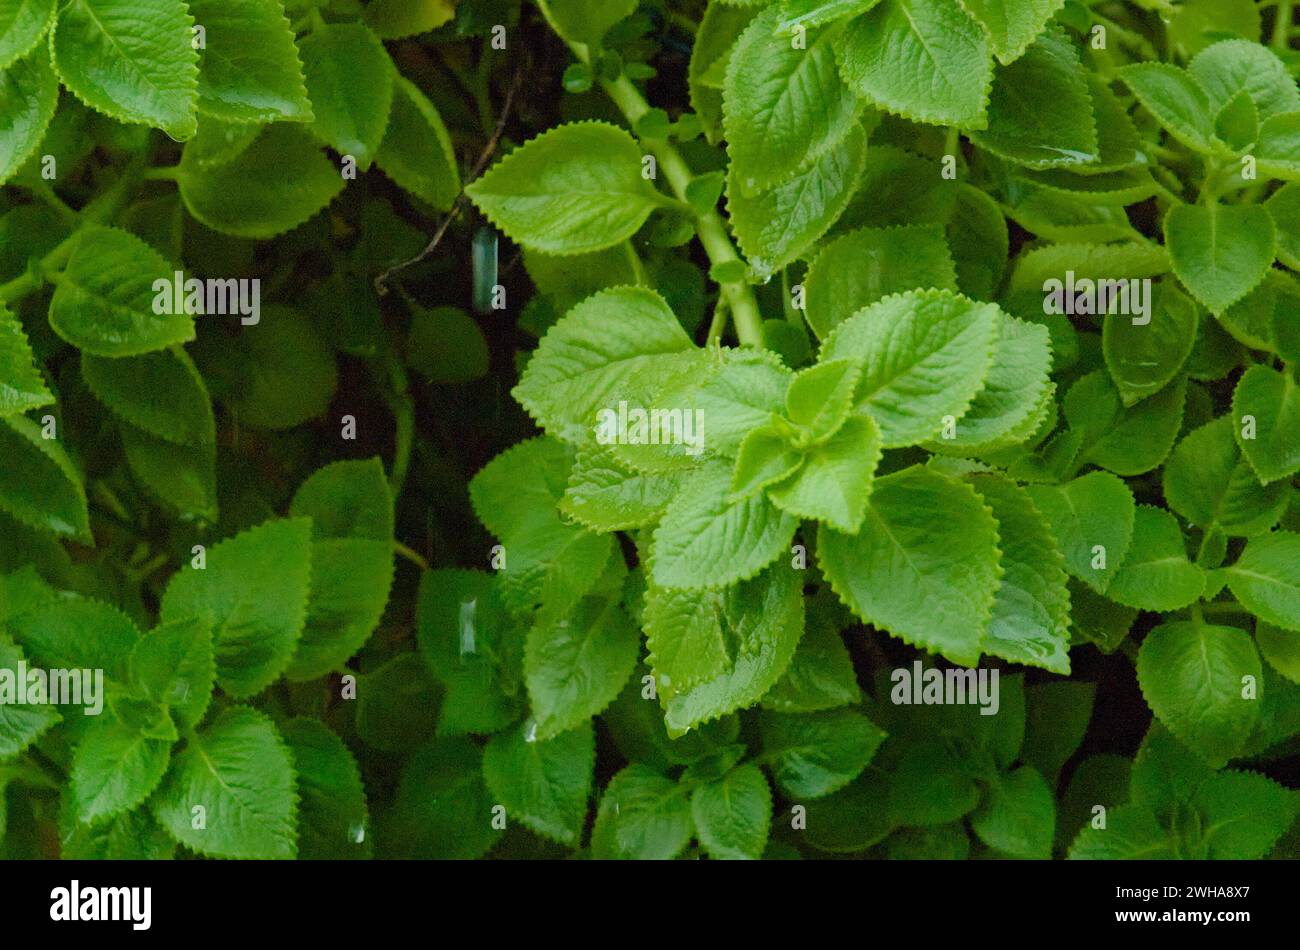 Pattern of fresh green leaves of Indian borage covered in raindrops, Rustic borage (Botanical name - Plectranthus amboinicus) Stock Photo